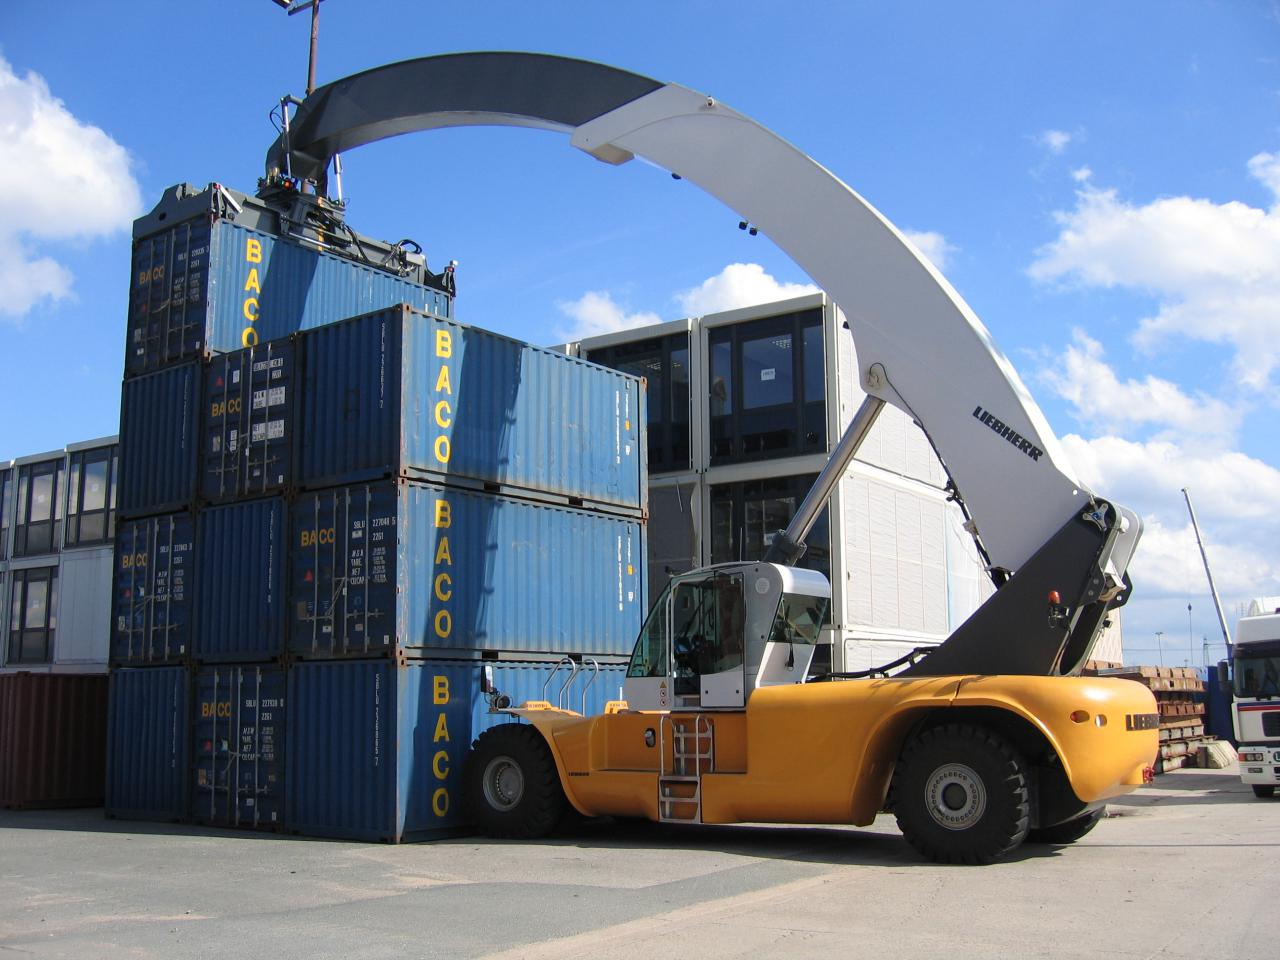 Advanced companies in the production of cargo-lifting equipment